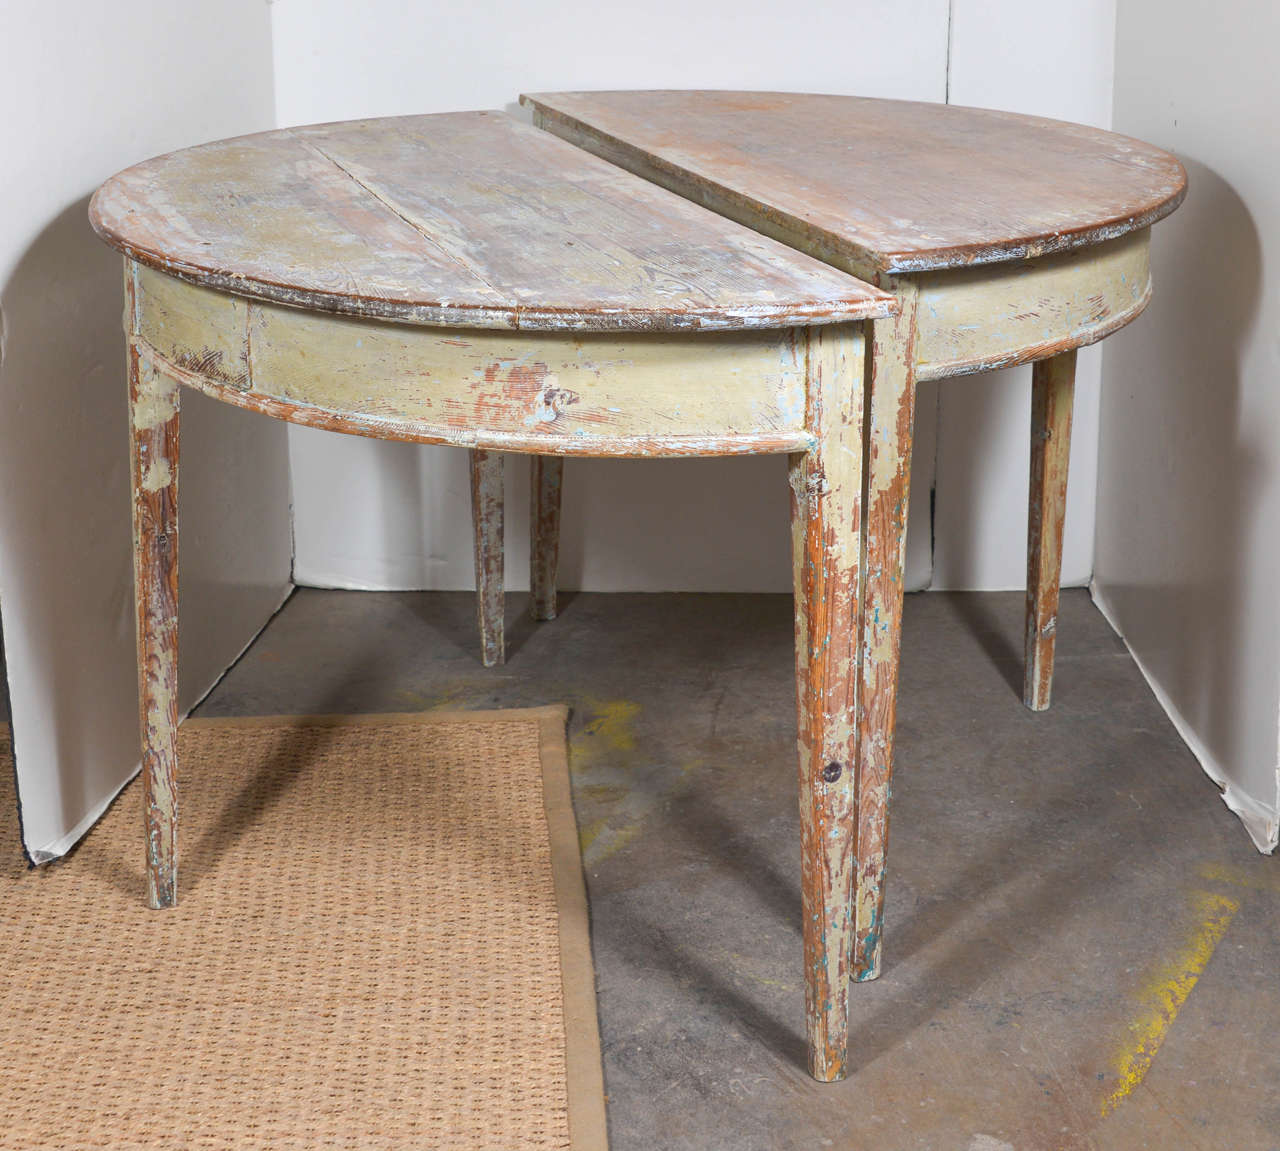 Beautiful pair of demilune tables with original light green paint showing through.